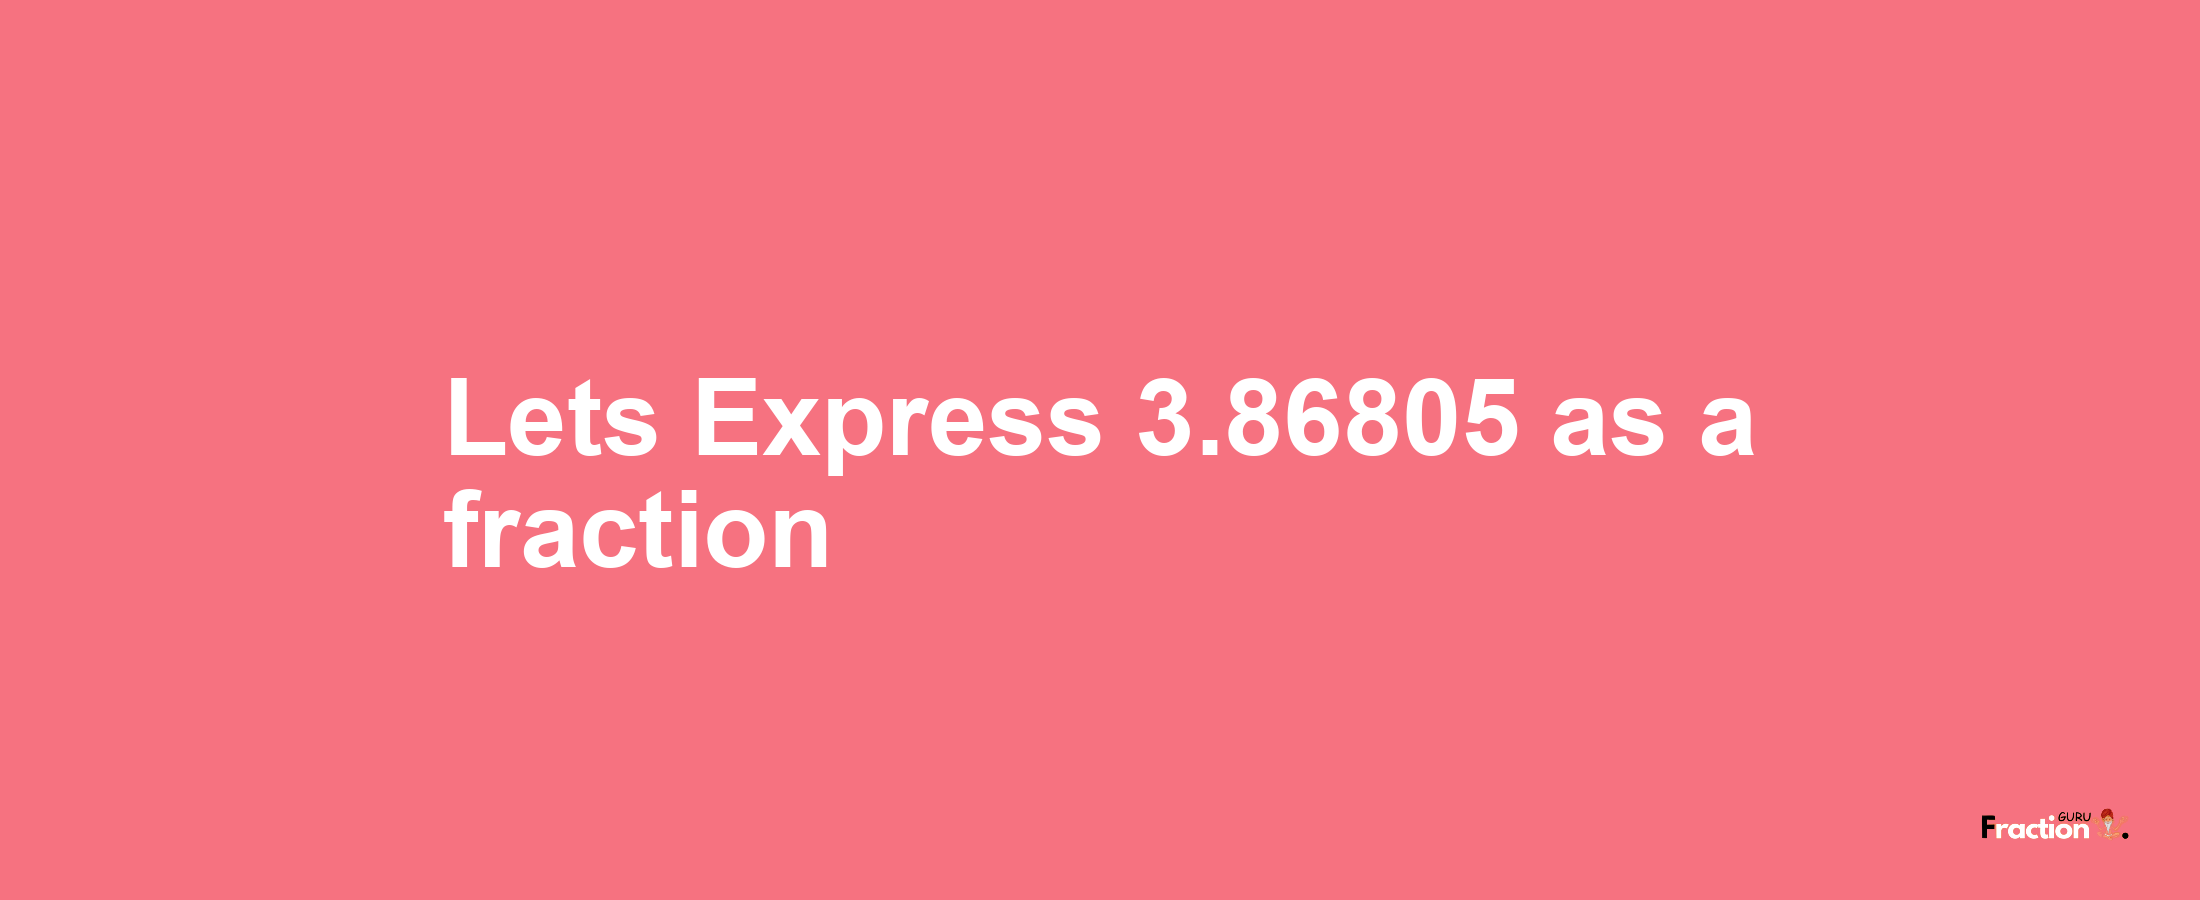 Lets Express 3.86805 as afraction